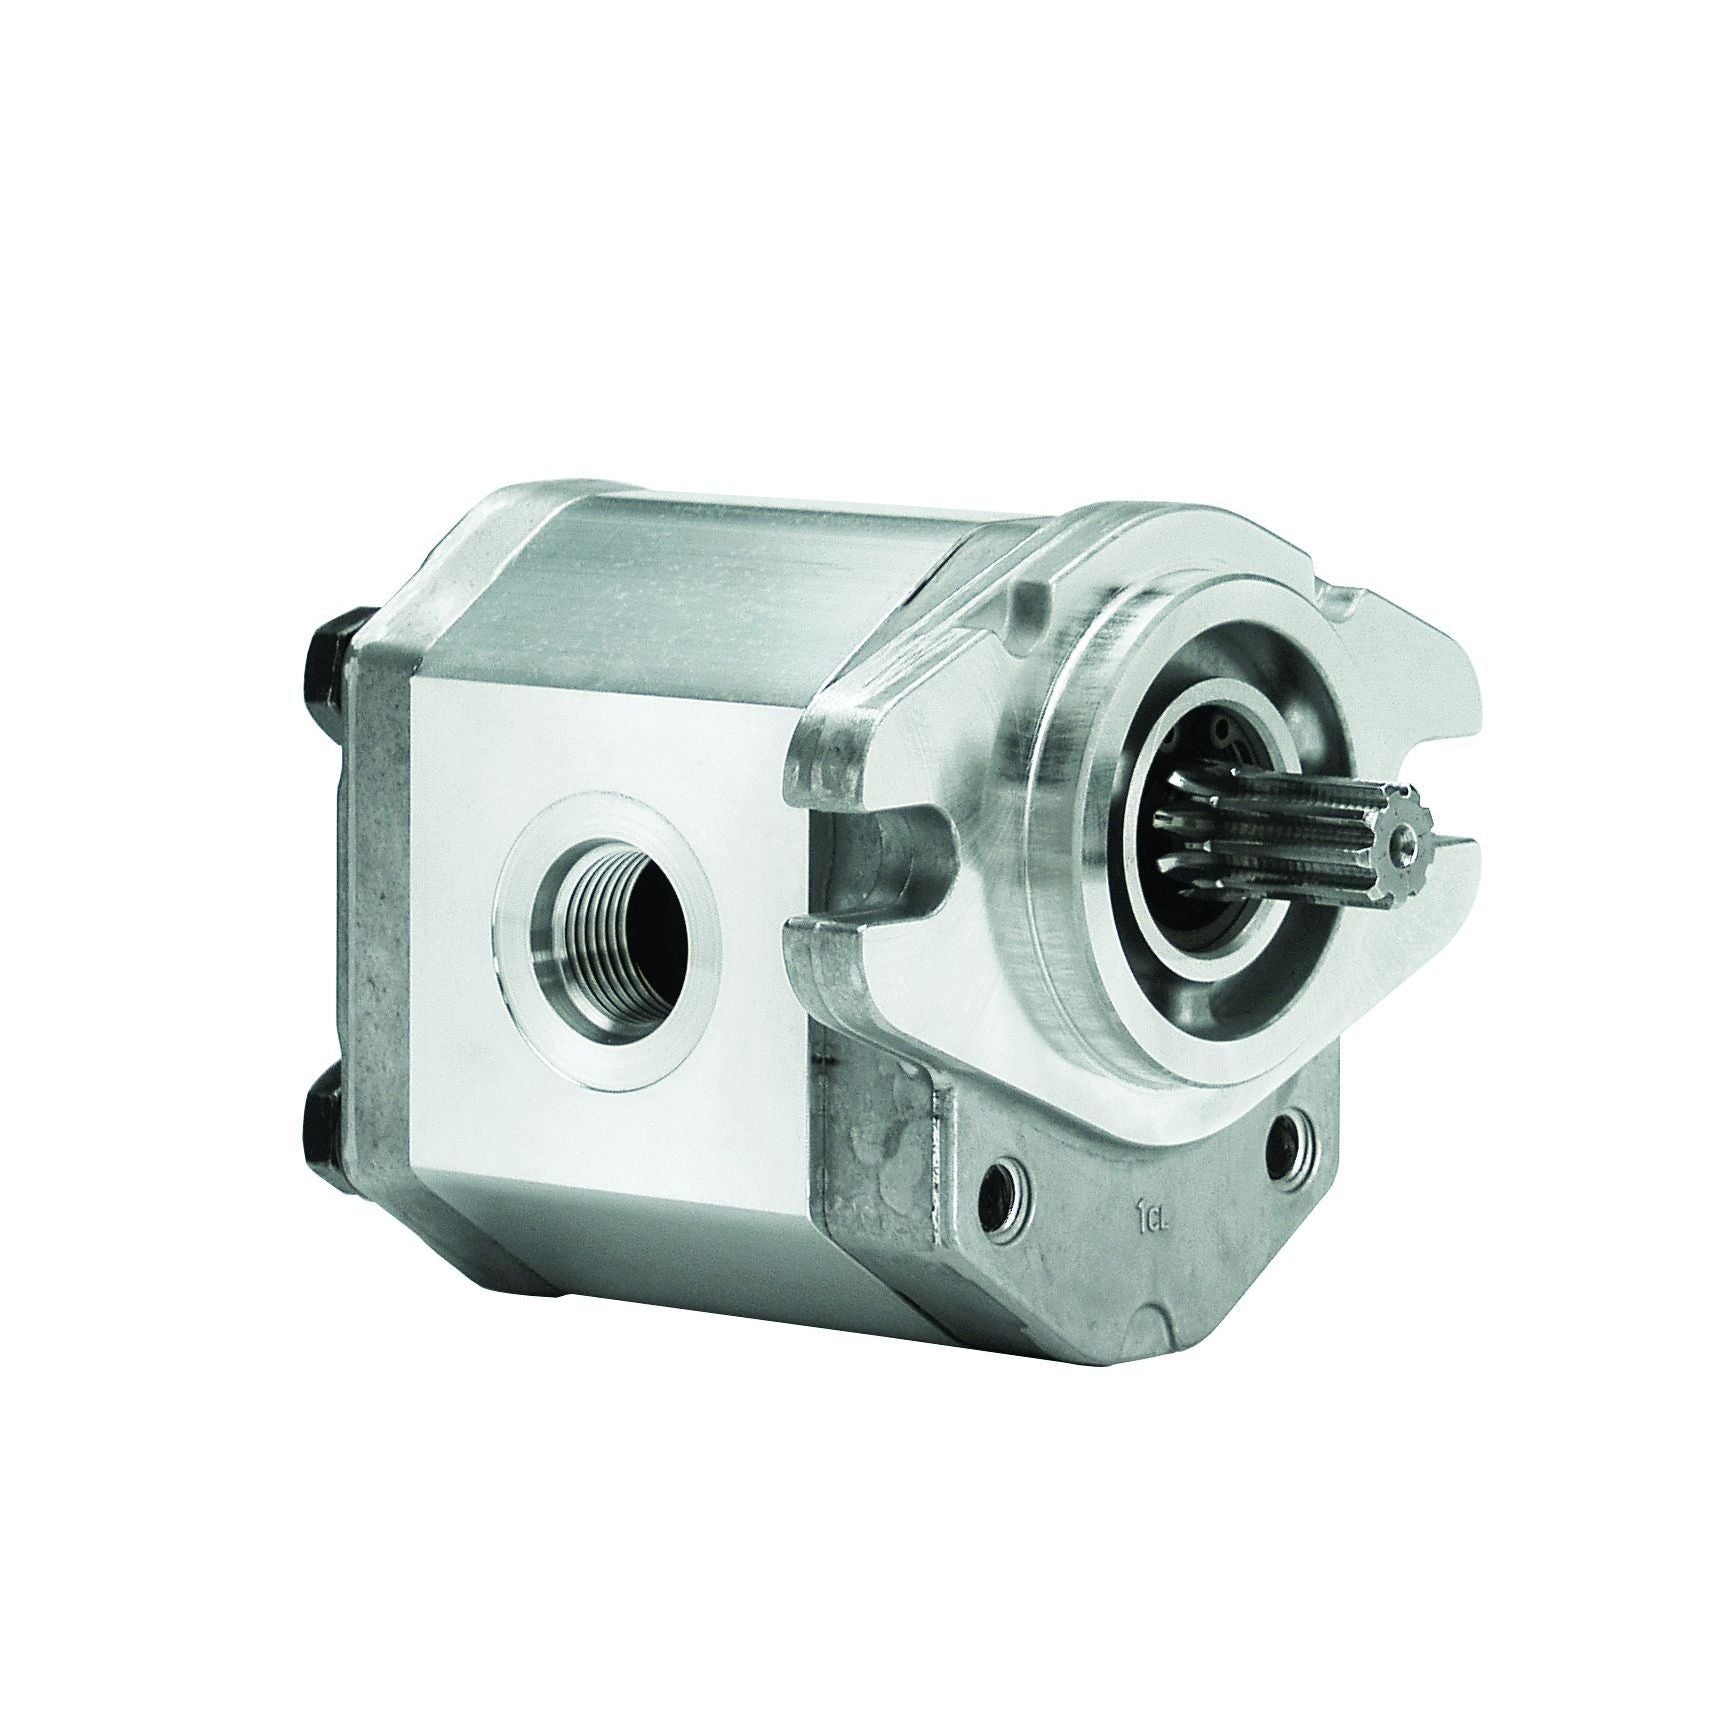 ALP3A-S-94-S1-FA : Marzocchi Gear Pump, CCW, 61cc (3.721in3), 28.99 GPM, 2755psi, 2800 RPM, #24 SAE (1.5") In, #12 SAE (3/4") Out, Splined Shaft 13T 16/32DP, SAE B 2-Bolt Mount